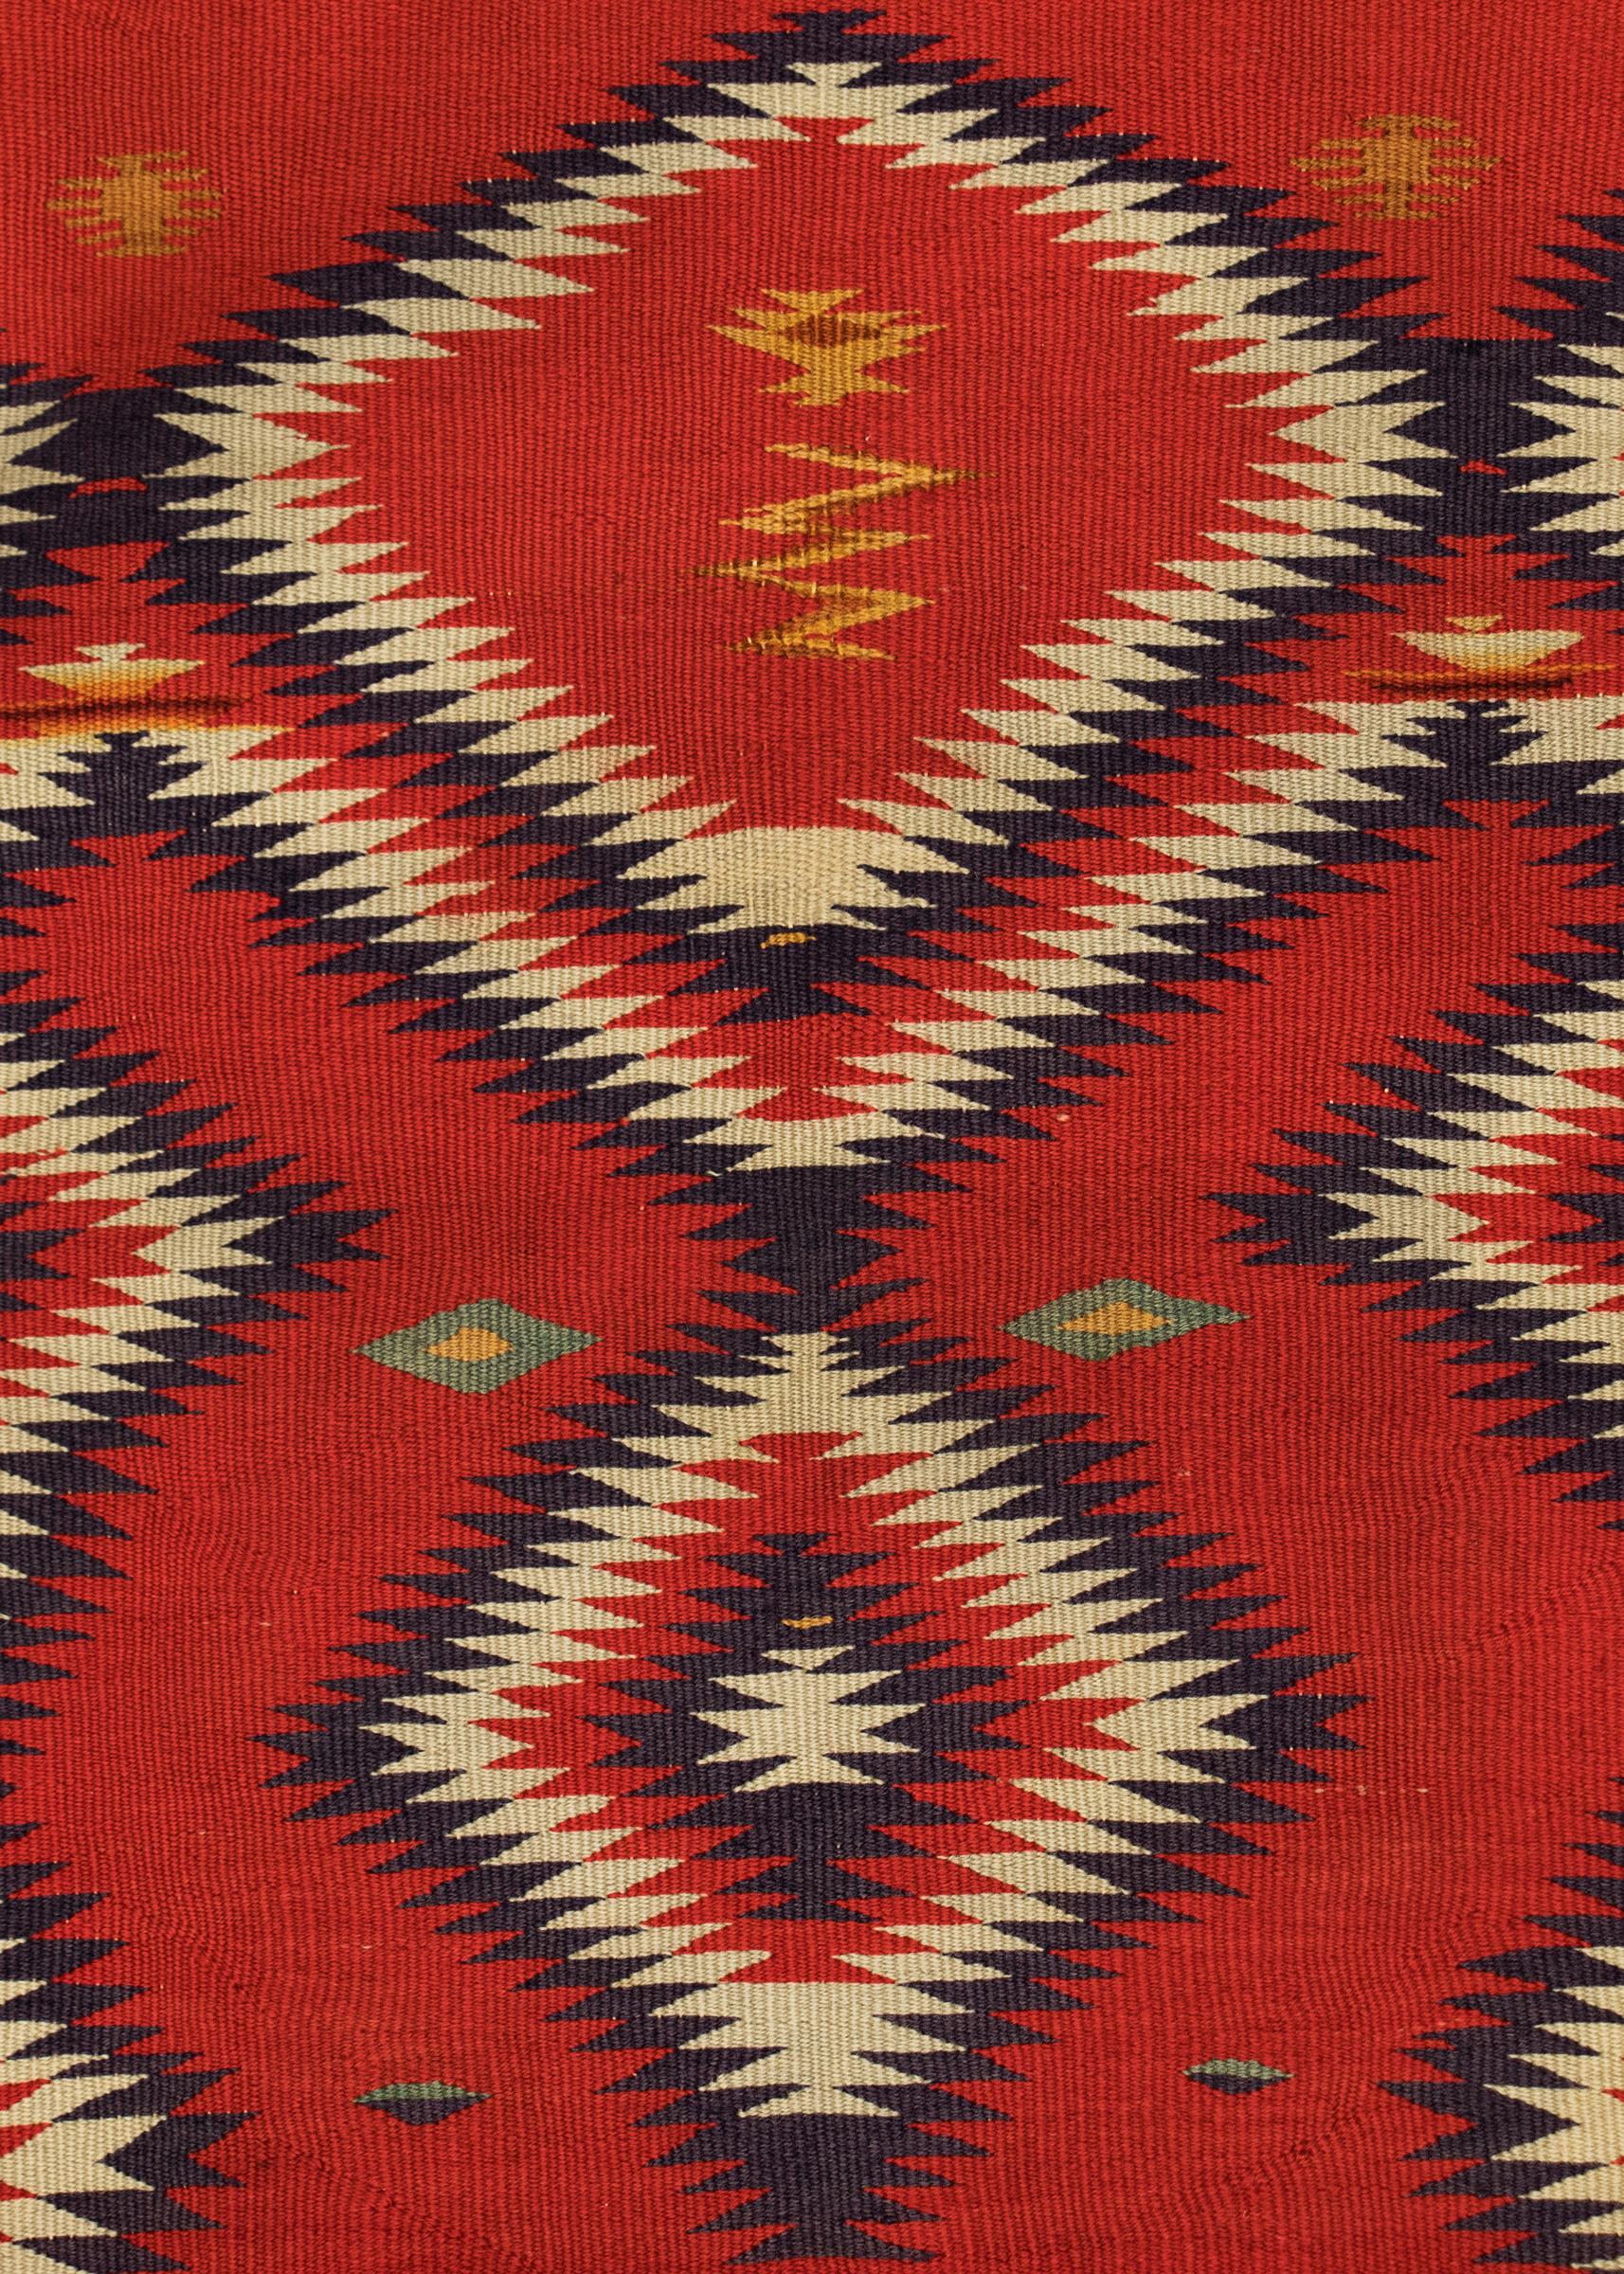 Authentic vintage 19th century circa 1890 Navajo textile in a single saddle blanket format woven of Germantown Yarns in an Eyedazzler pattern of vibrant colors including red, deep purple, white, green and yellow/gold. Germantown textiles like this